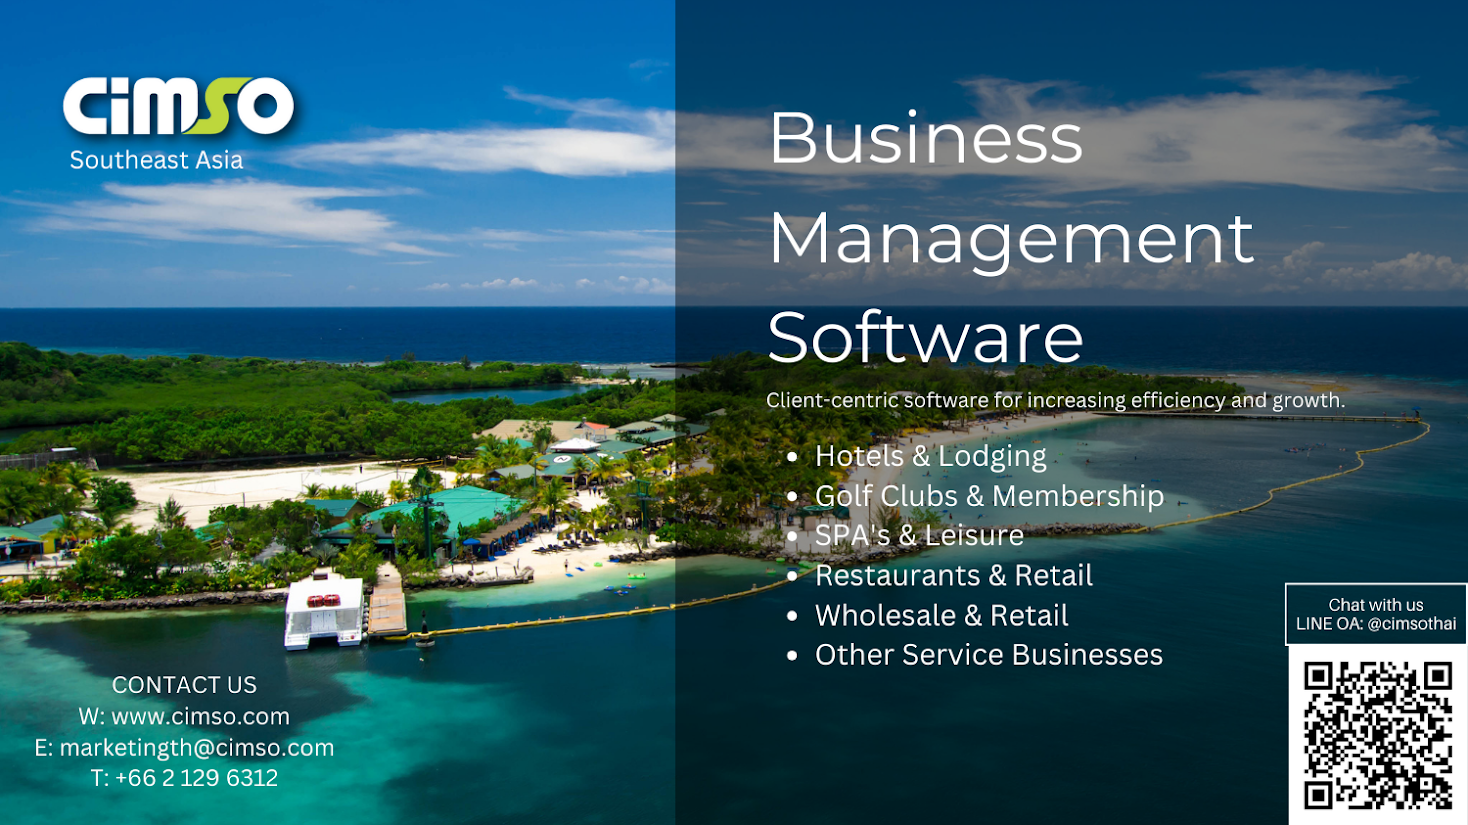 CiMSO Southeast Asia - Hospitality ERP Software for Hotel, Golf Club, Restaurant, and Businesses